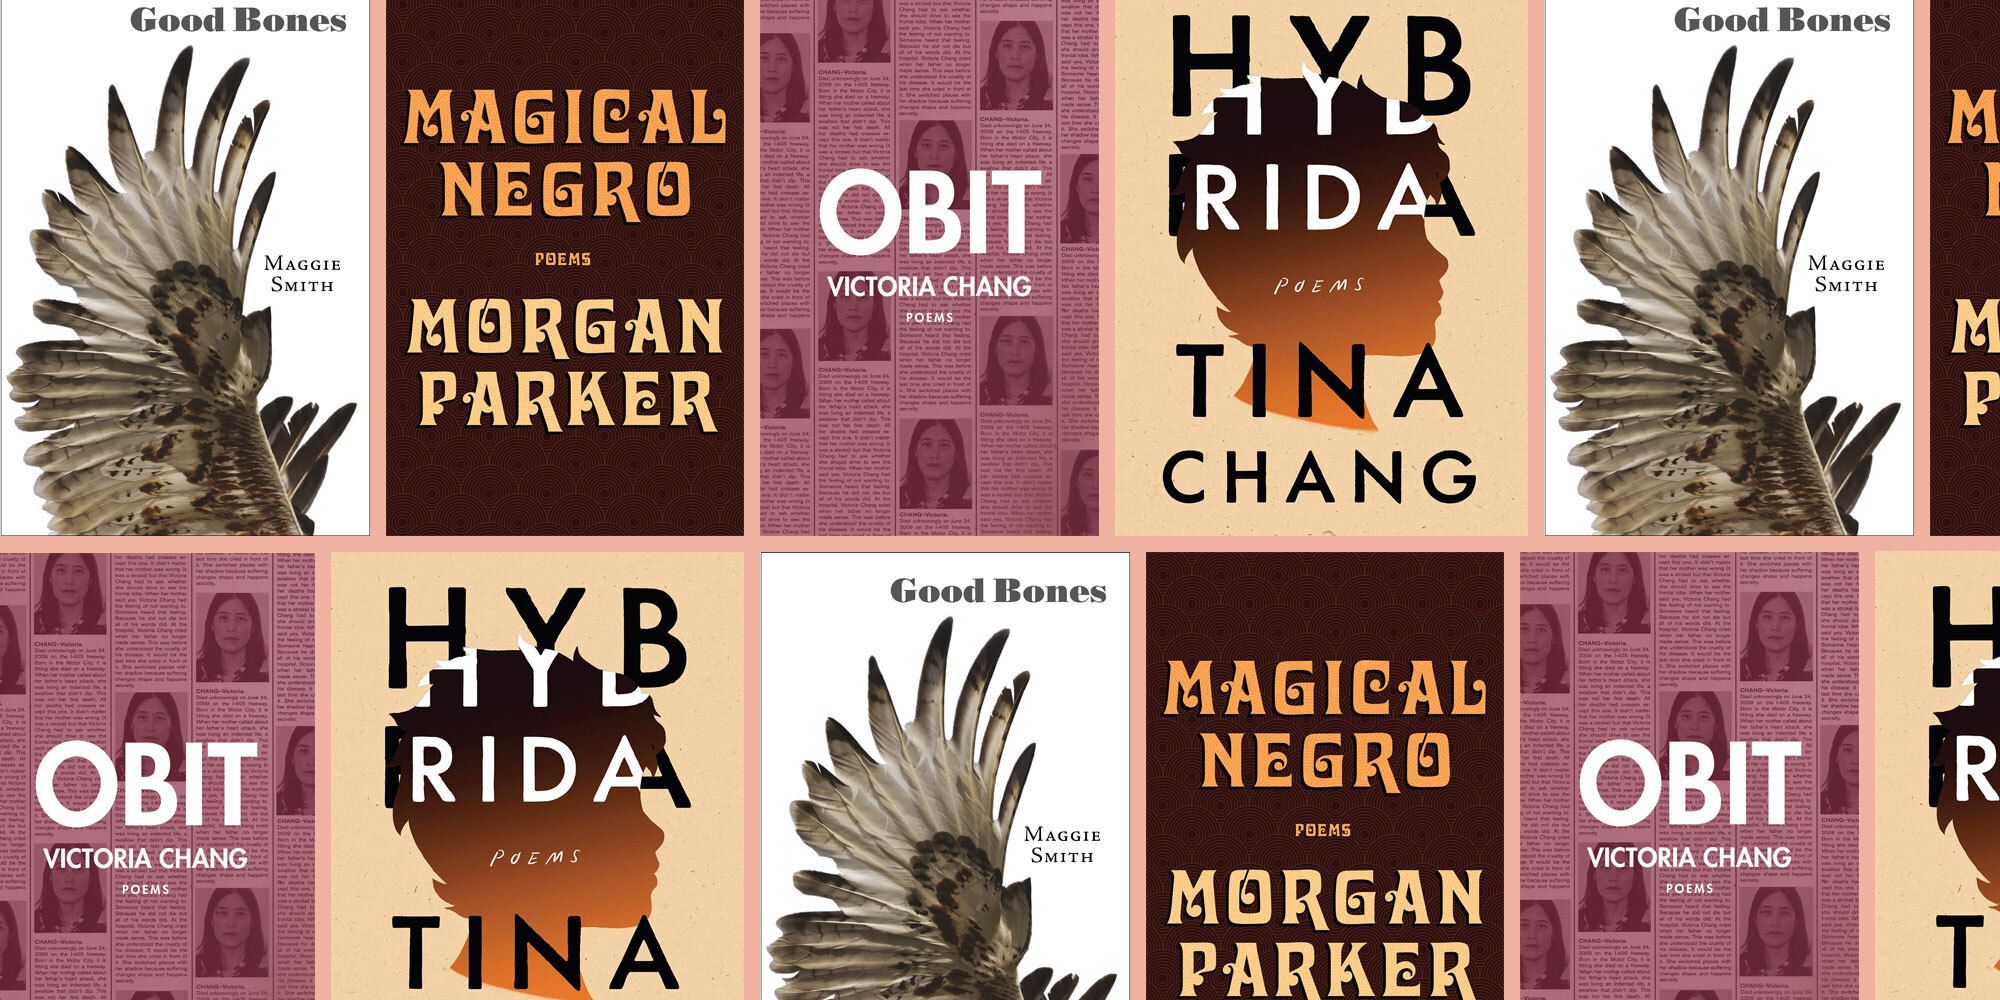 The Best Poetry Books, as Recommend by 29 Poets